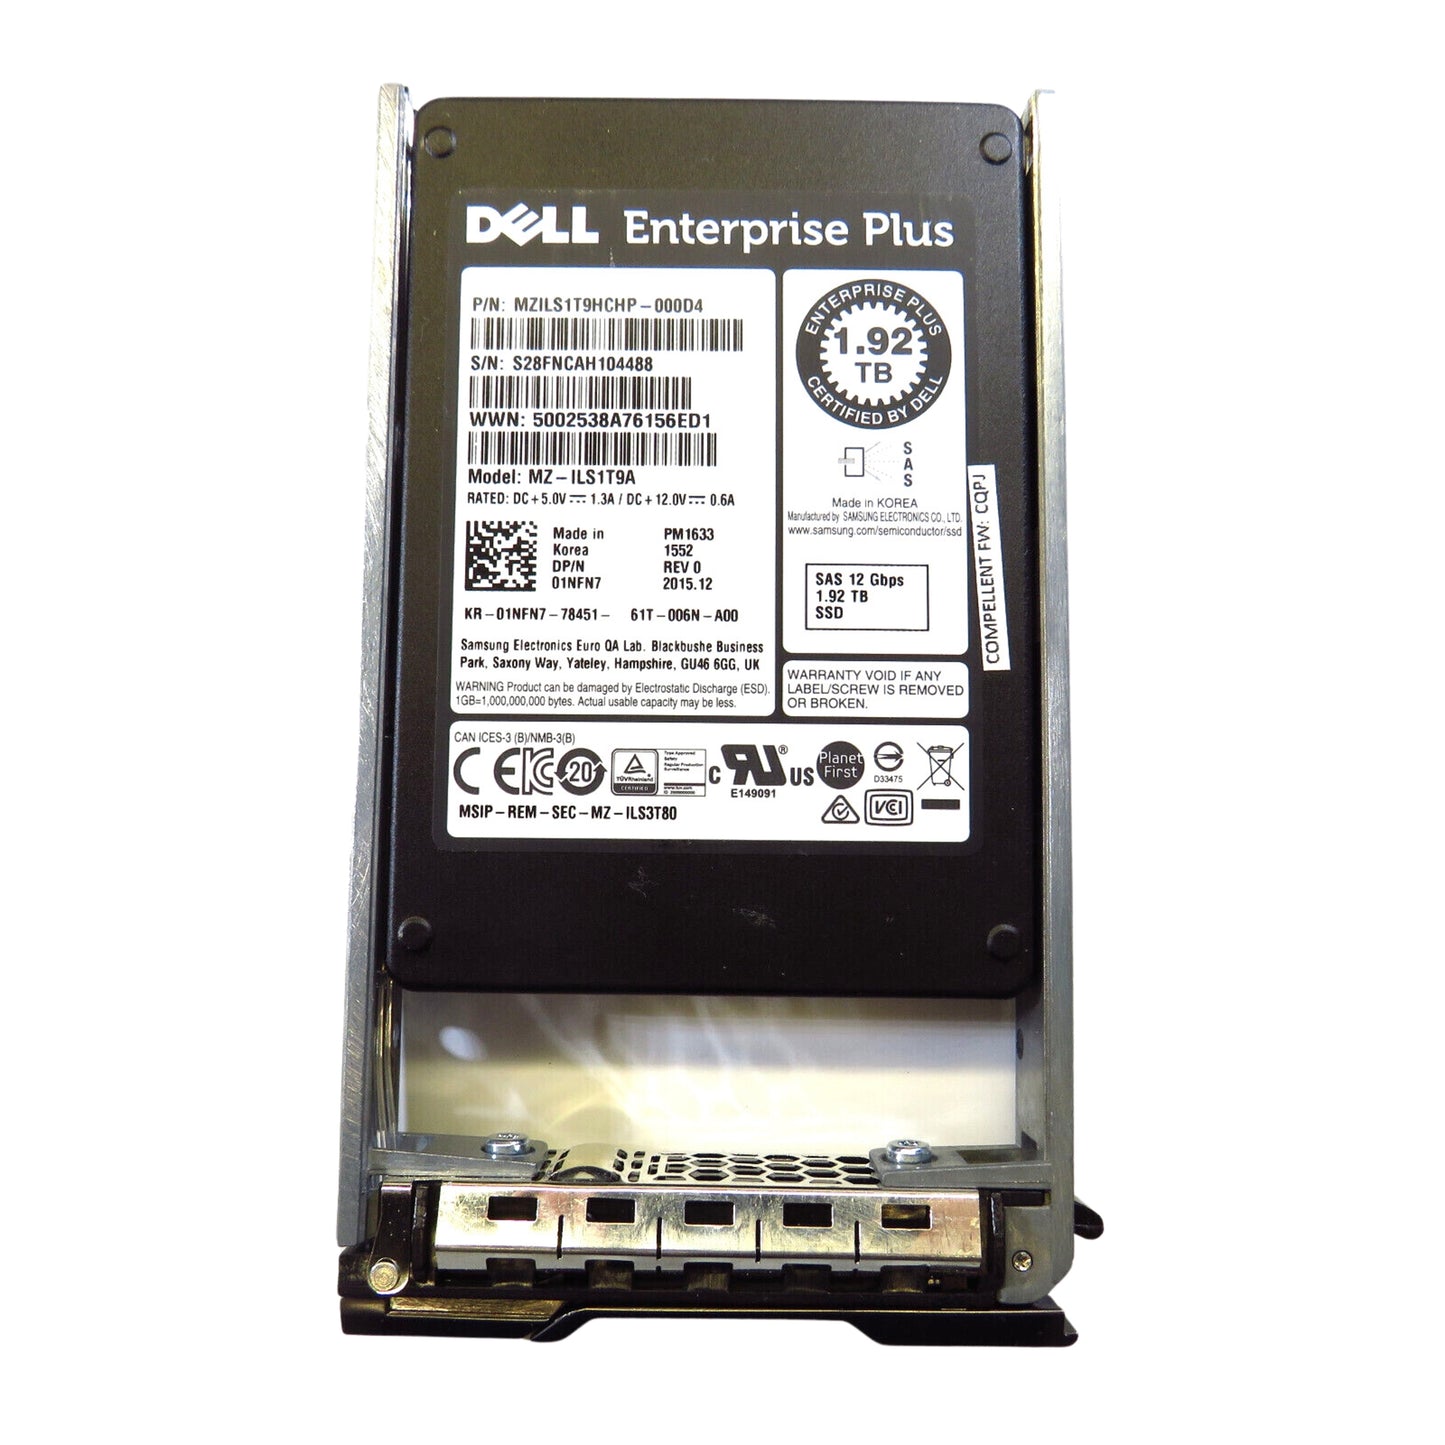 Dell Compellent 1NFN7 1.92TB 2.5" SAS 12Gbps SSD SSD Solid State Drive (Used - Good)